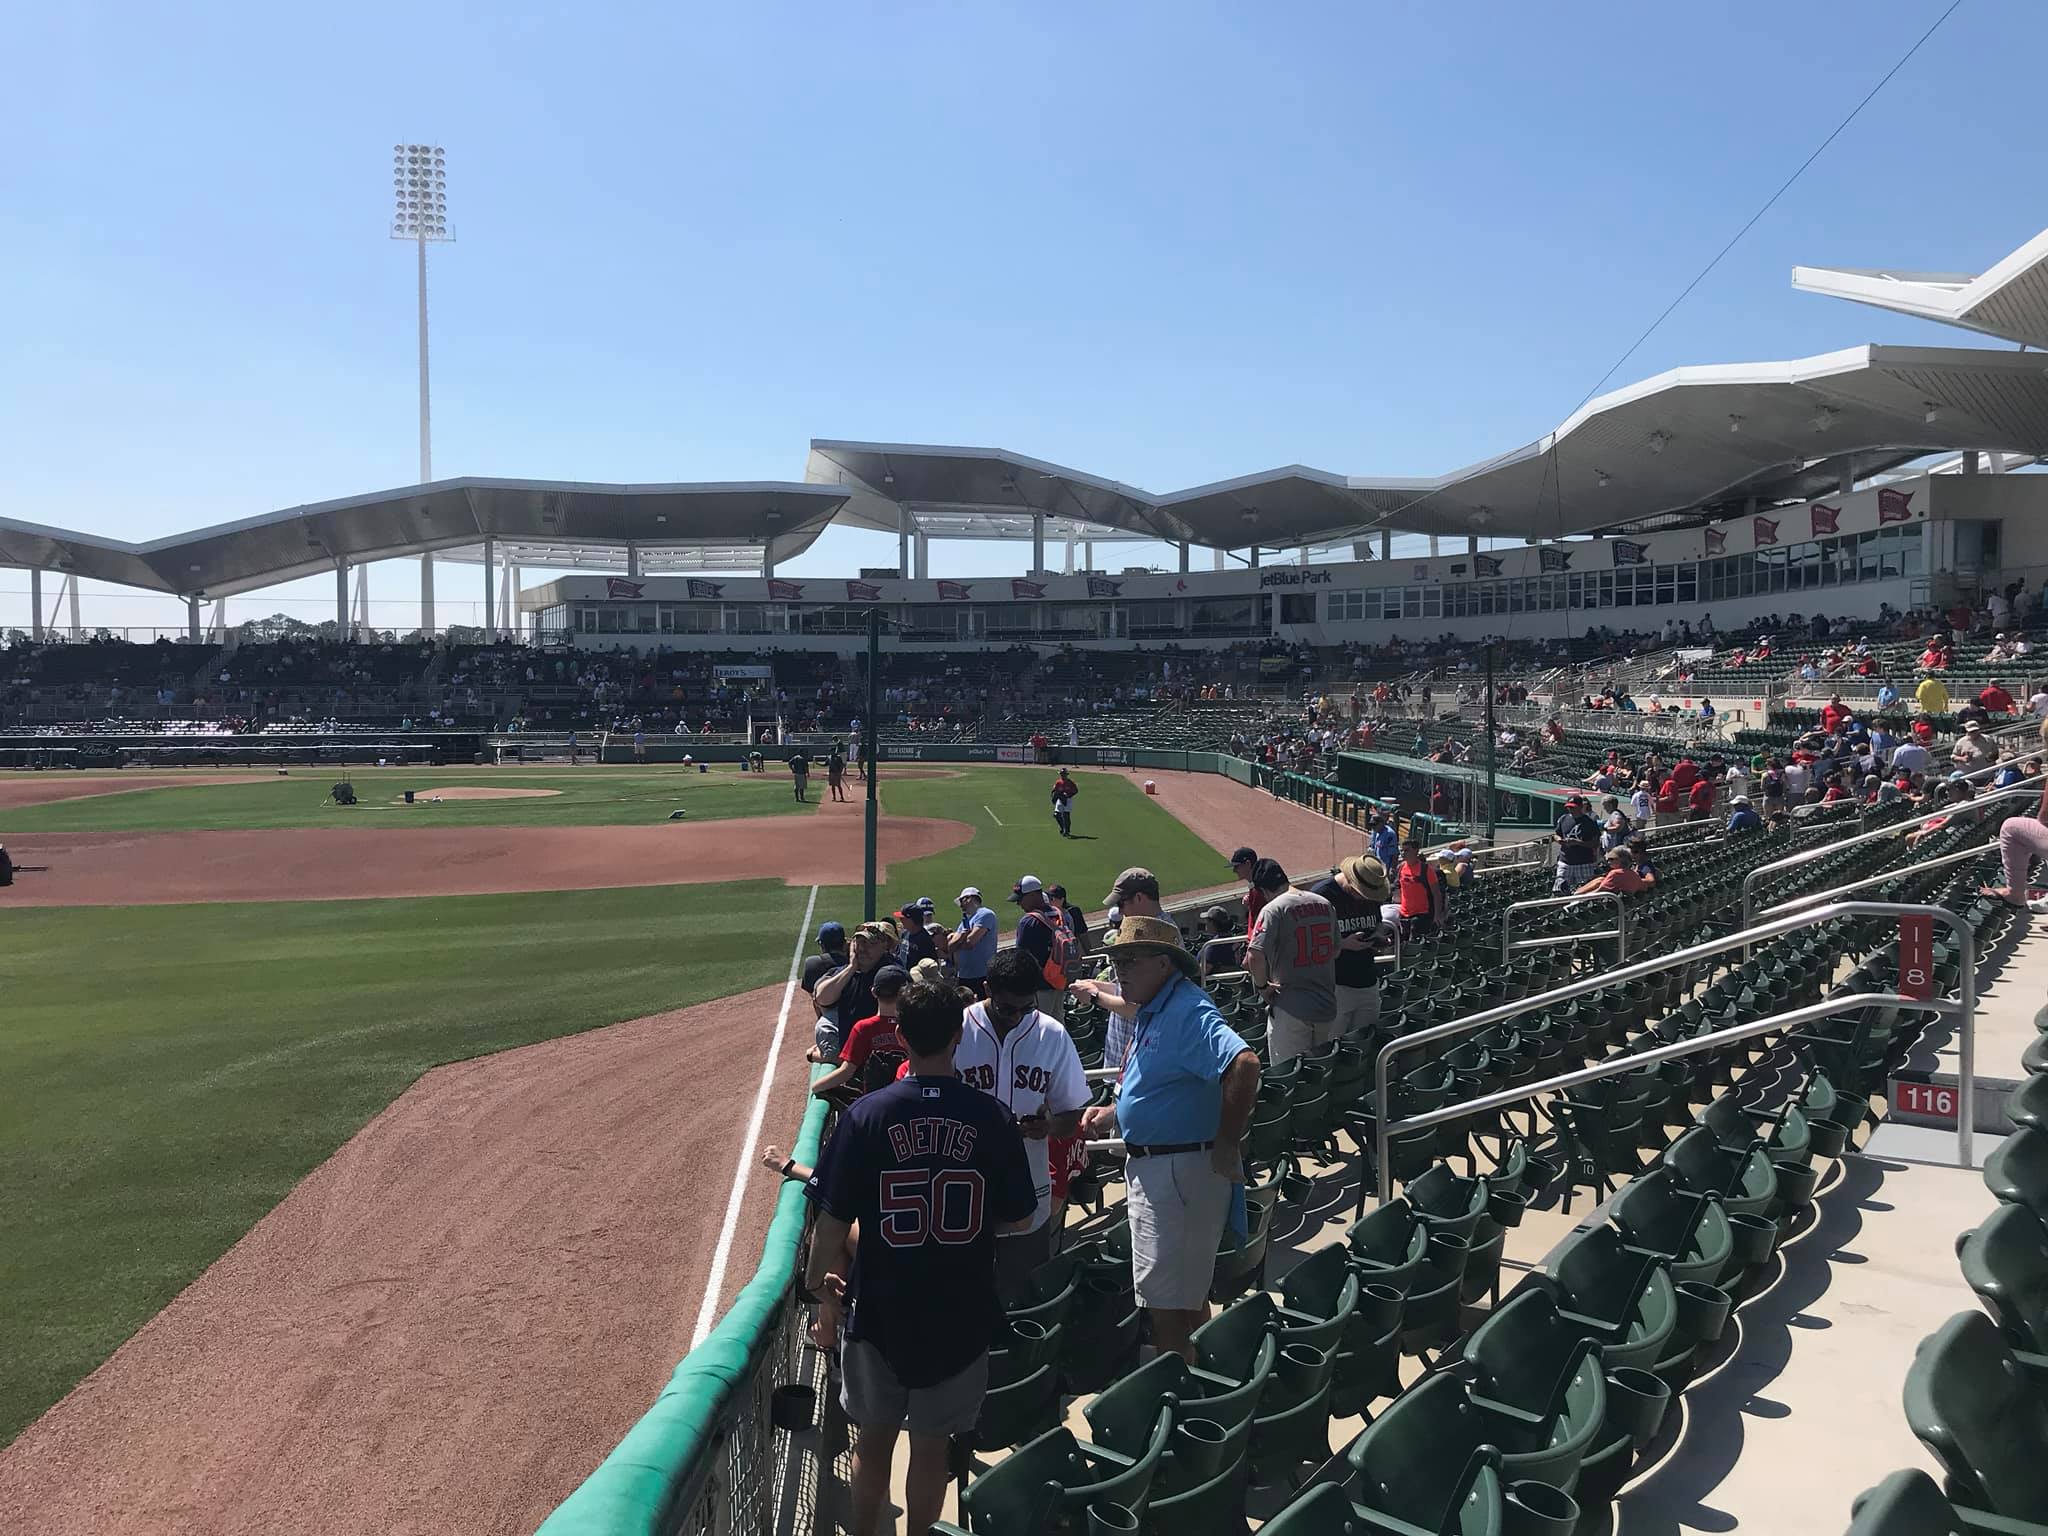 Getting to JetBlue Park